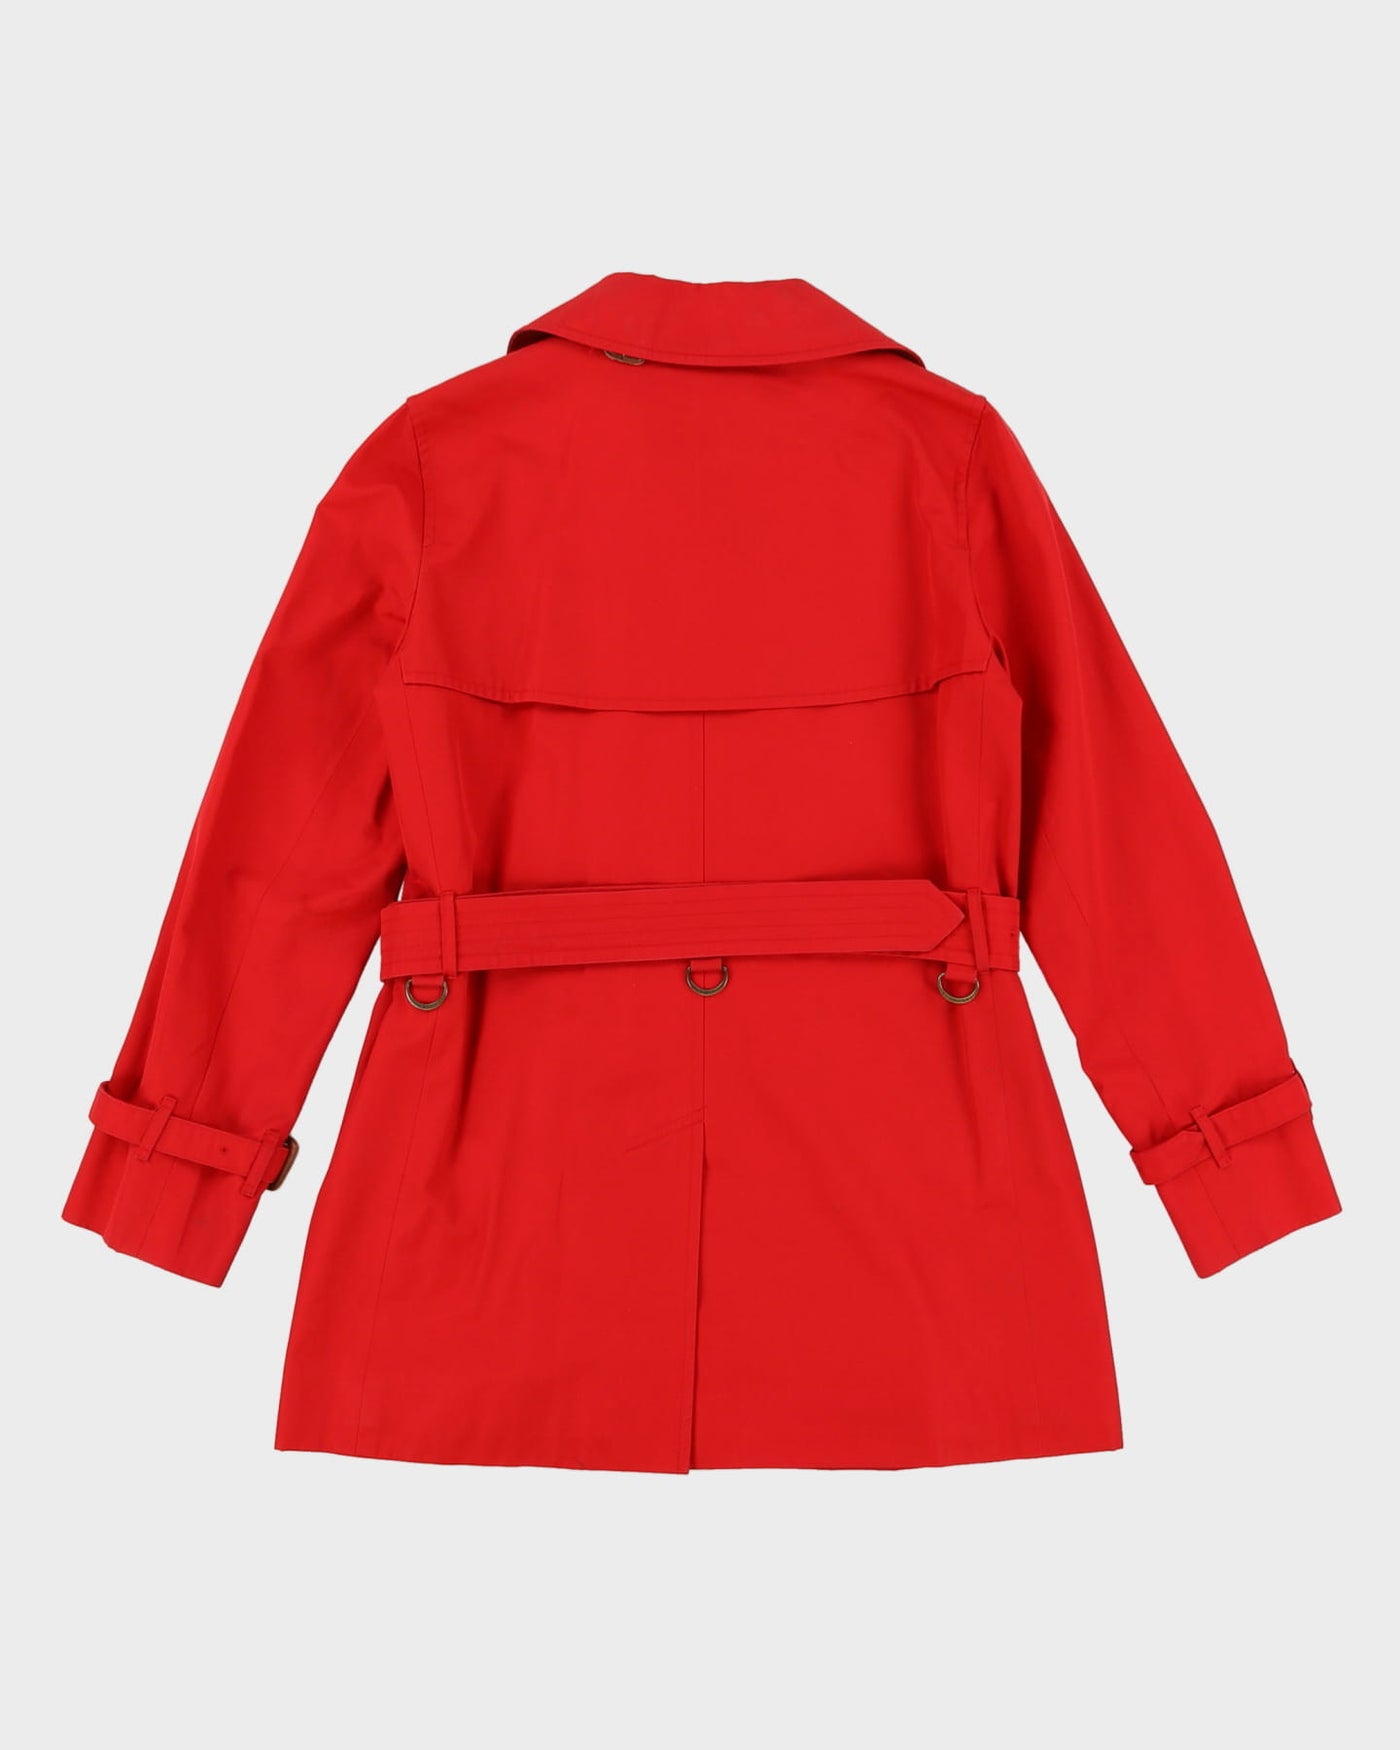 Burberry London Red Mac Style Jacket - S